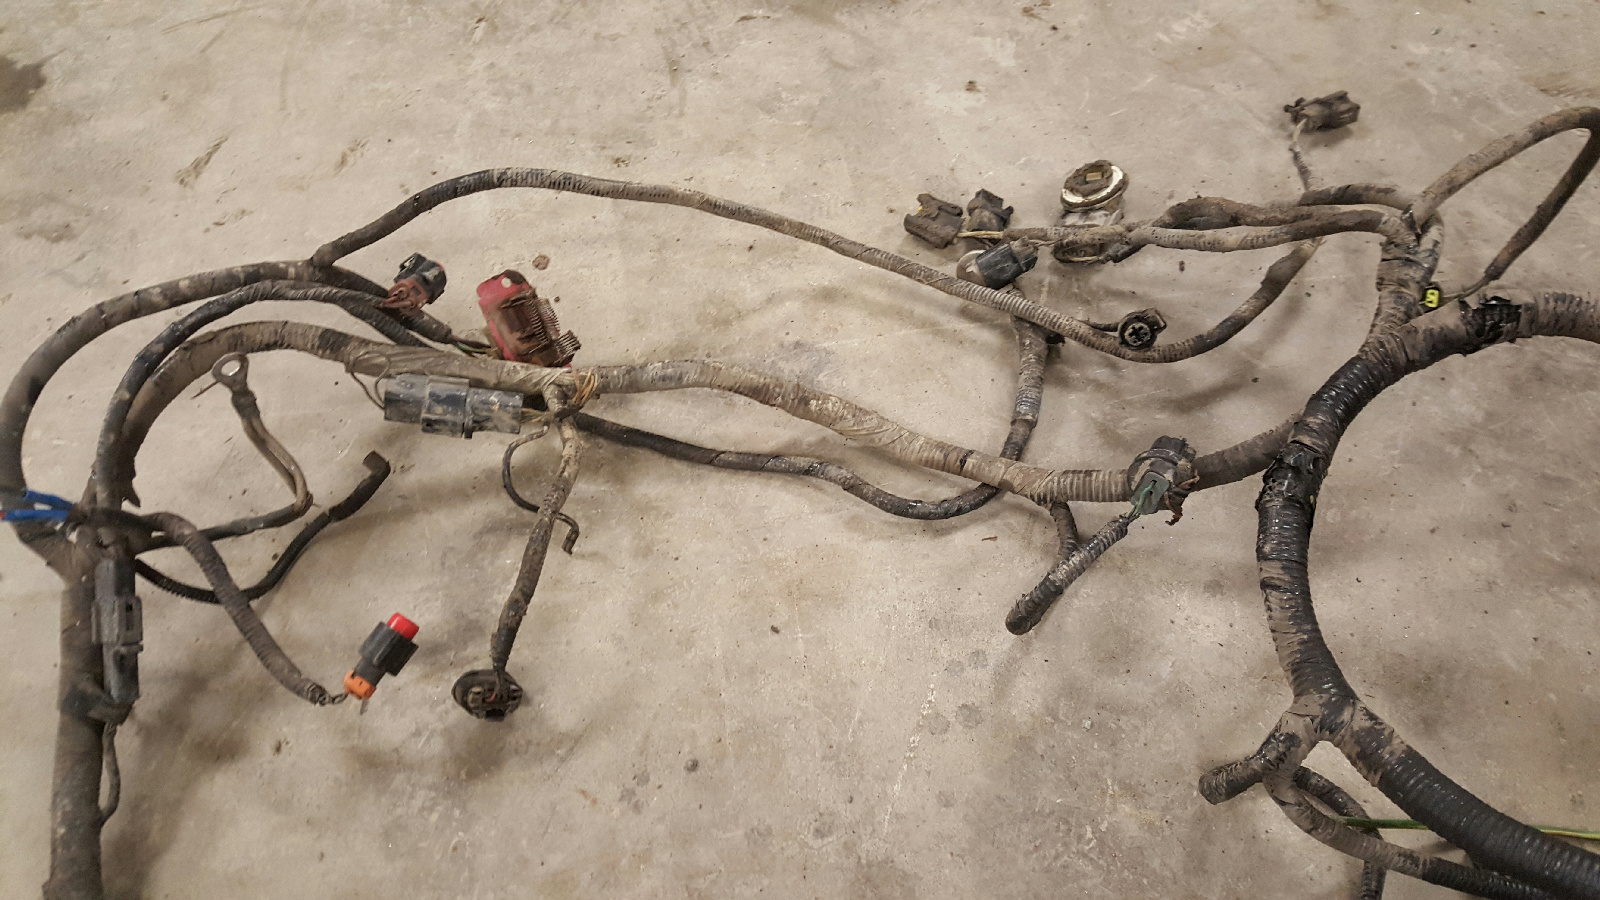 1999 2000 2001 2002 2003 Ford F250 F350 7.3L engine compartment wiring 2001 7.3 Powerstroke Engine Wiring Harness